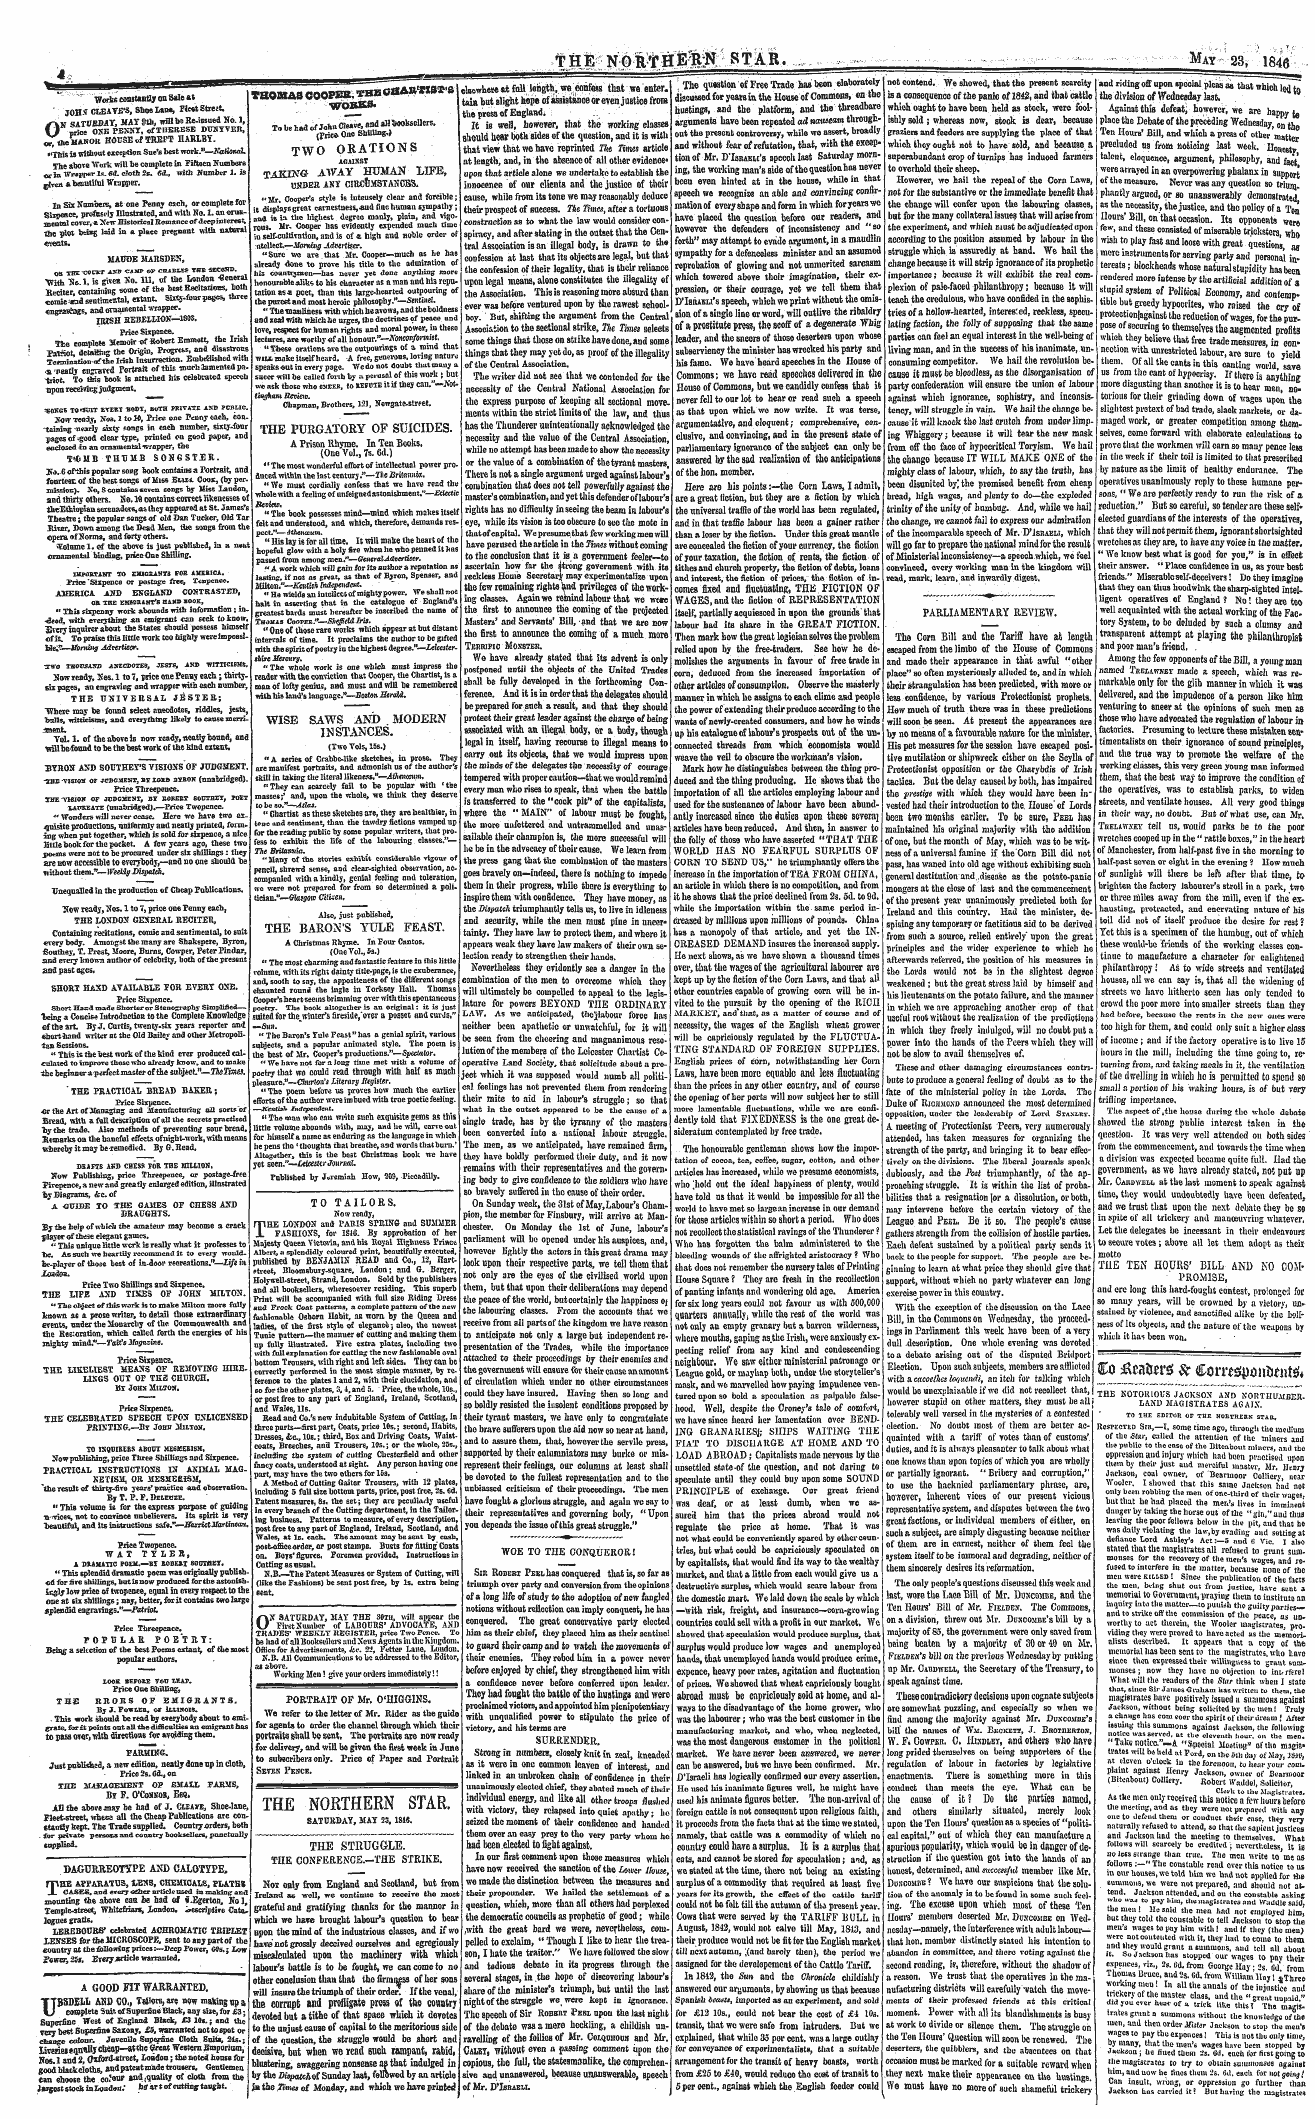 Northern Star (1837-1852): jS F Y, 2nd edition - The Northern Star. Saturday, May 23, 1846.